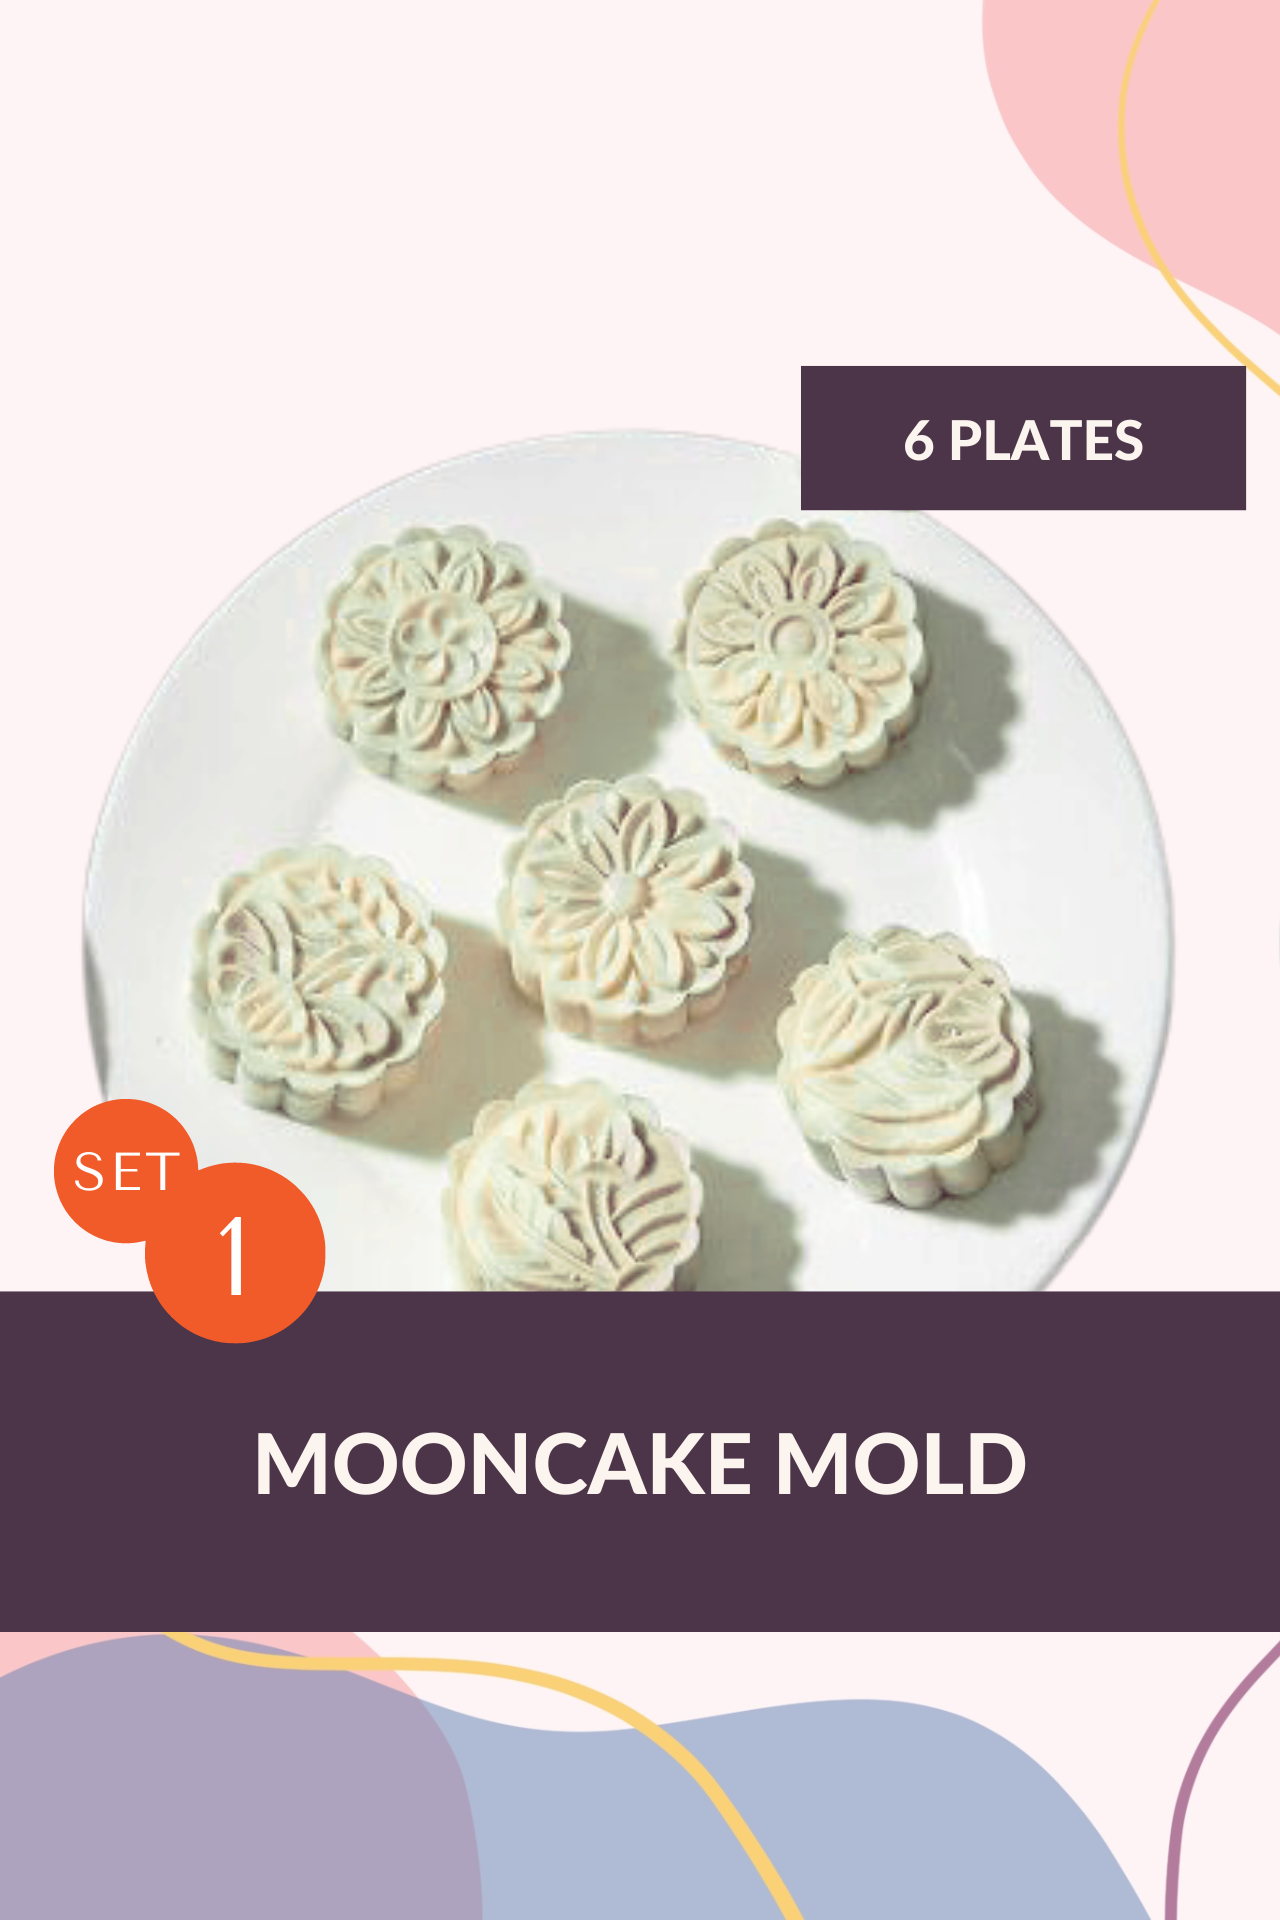 Mooncake Mold, Assorted-6 plates (50g–60g, 6 Designs)